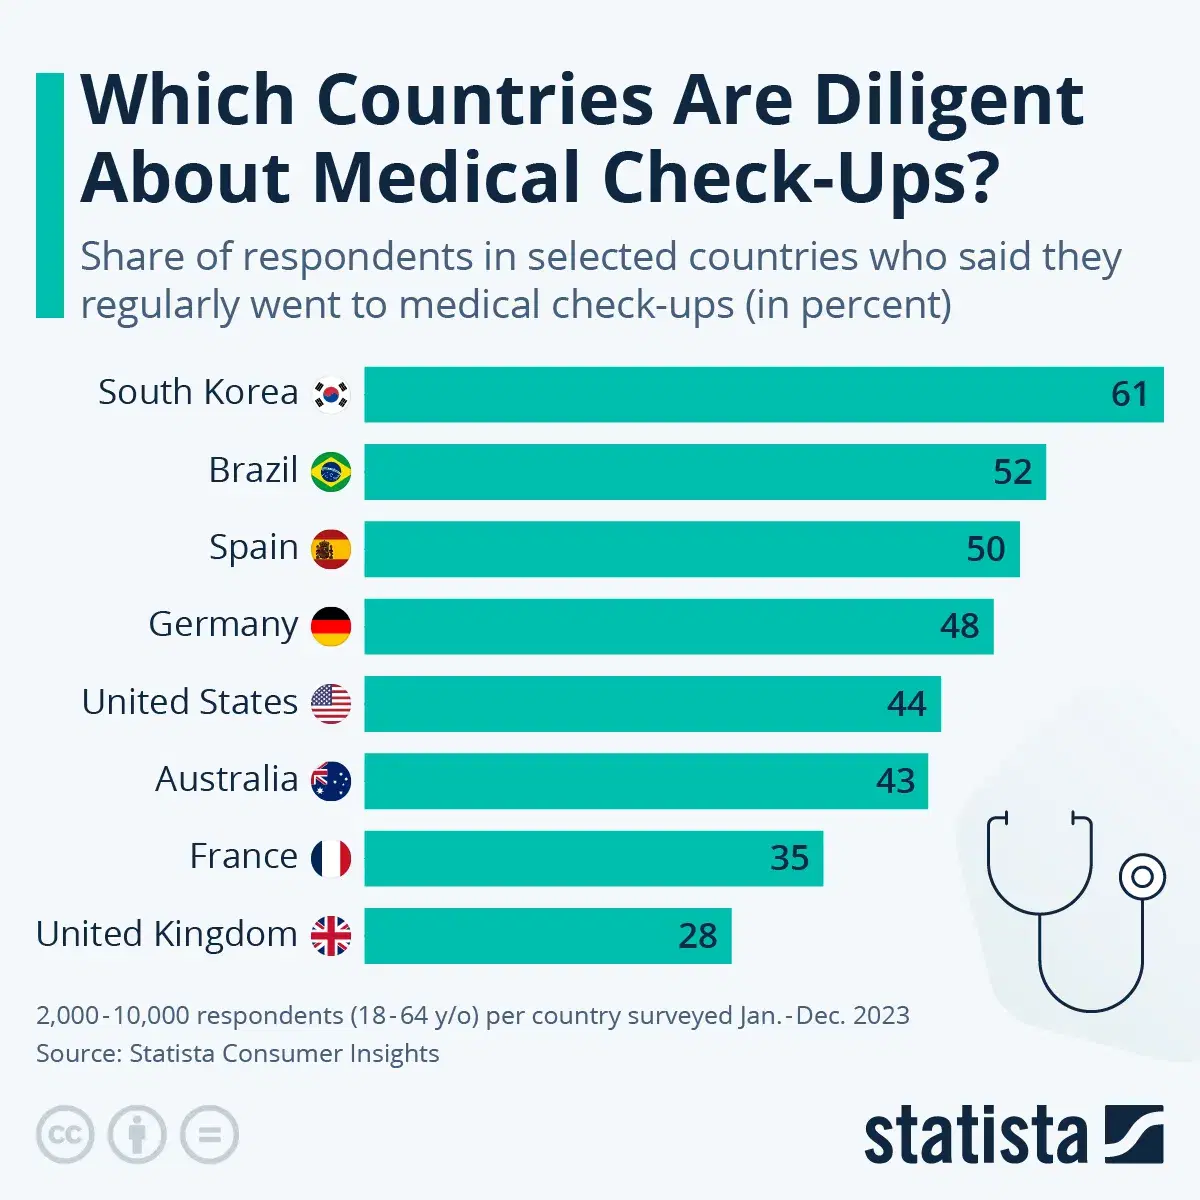 Which Countries Are Diligent About Medical Check-Ups?